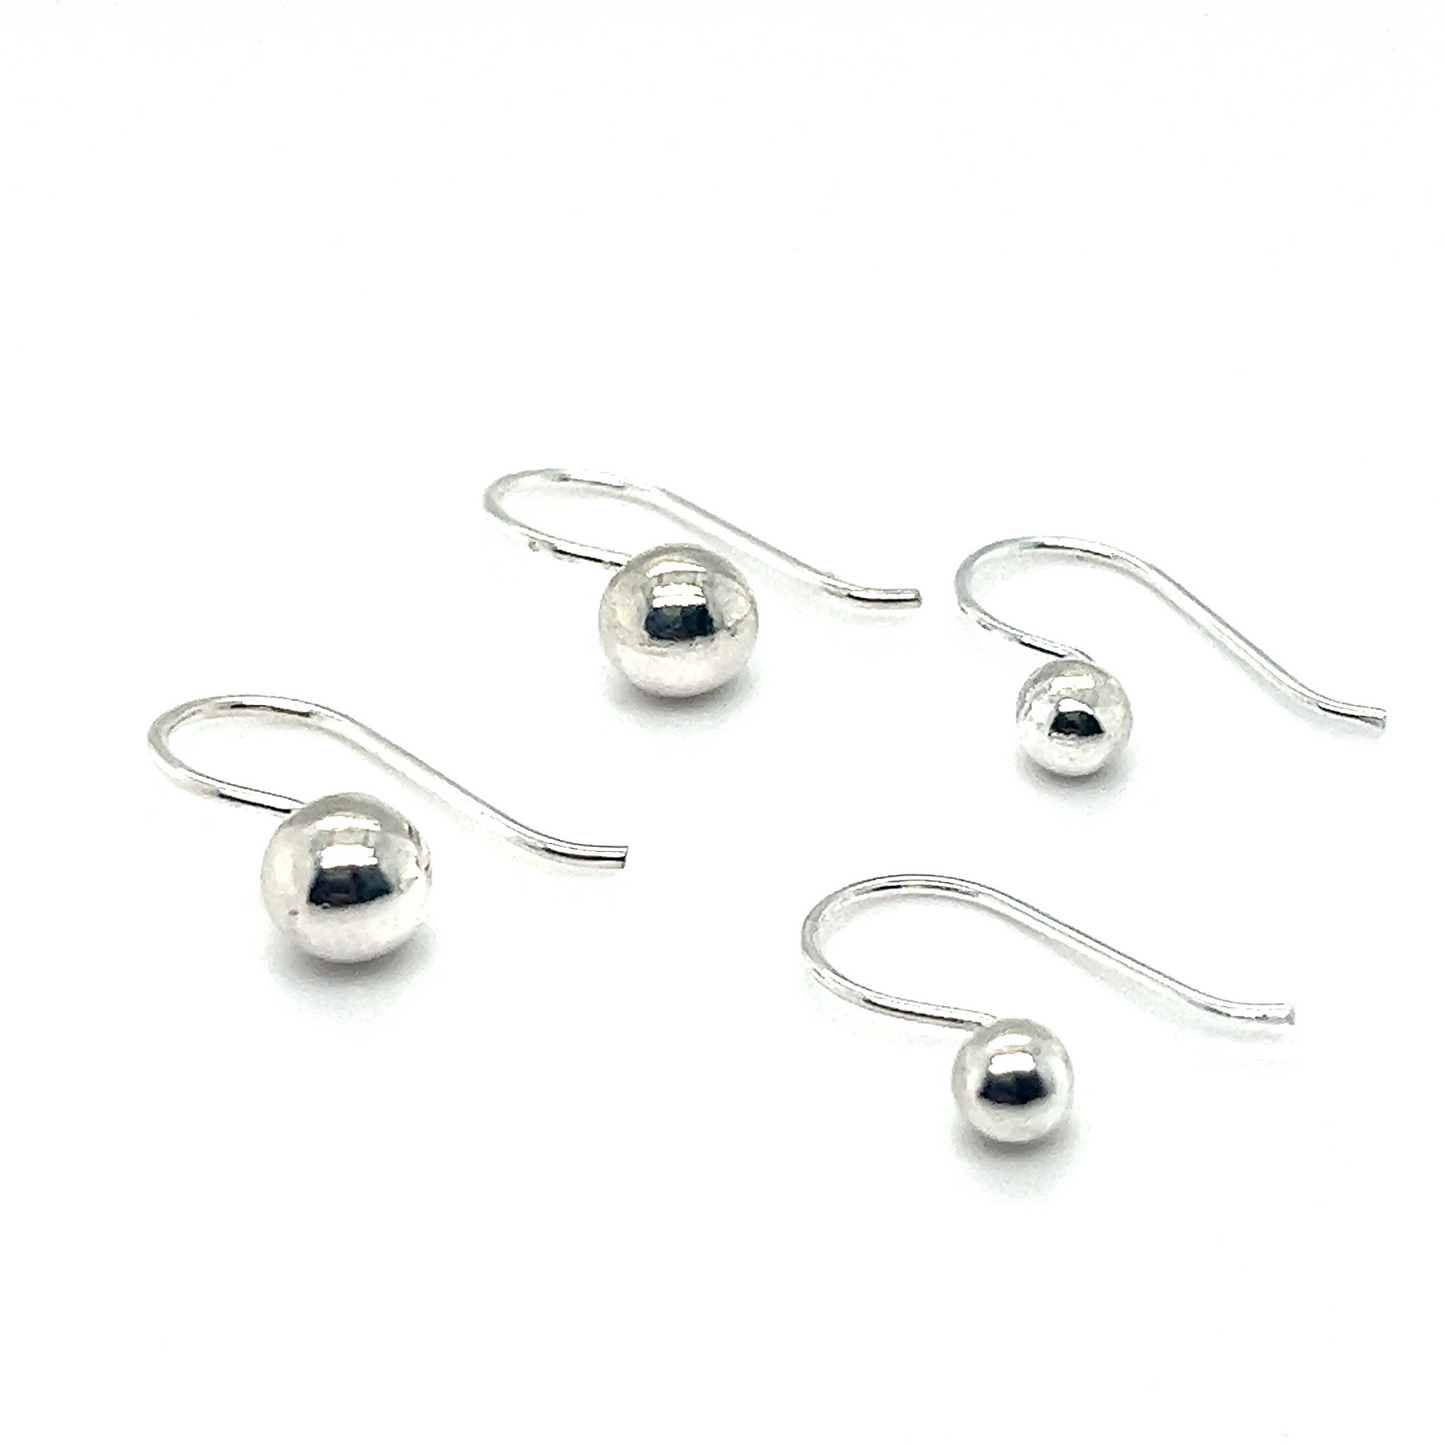 Dainty Fixed Ball Earrings by Super Silver on a white background.